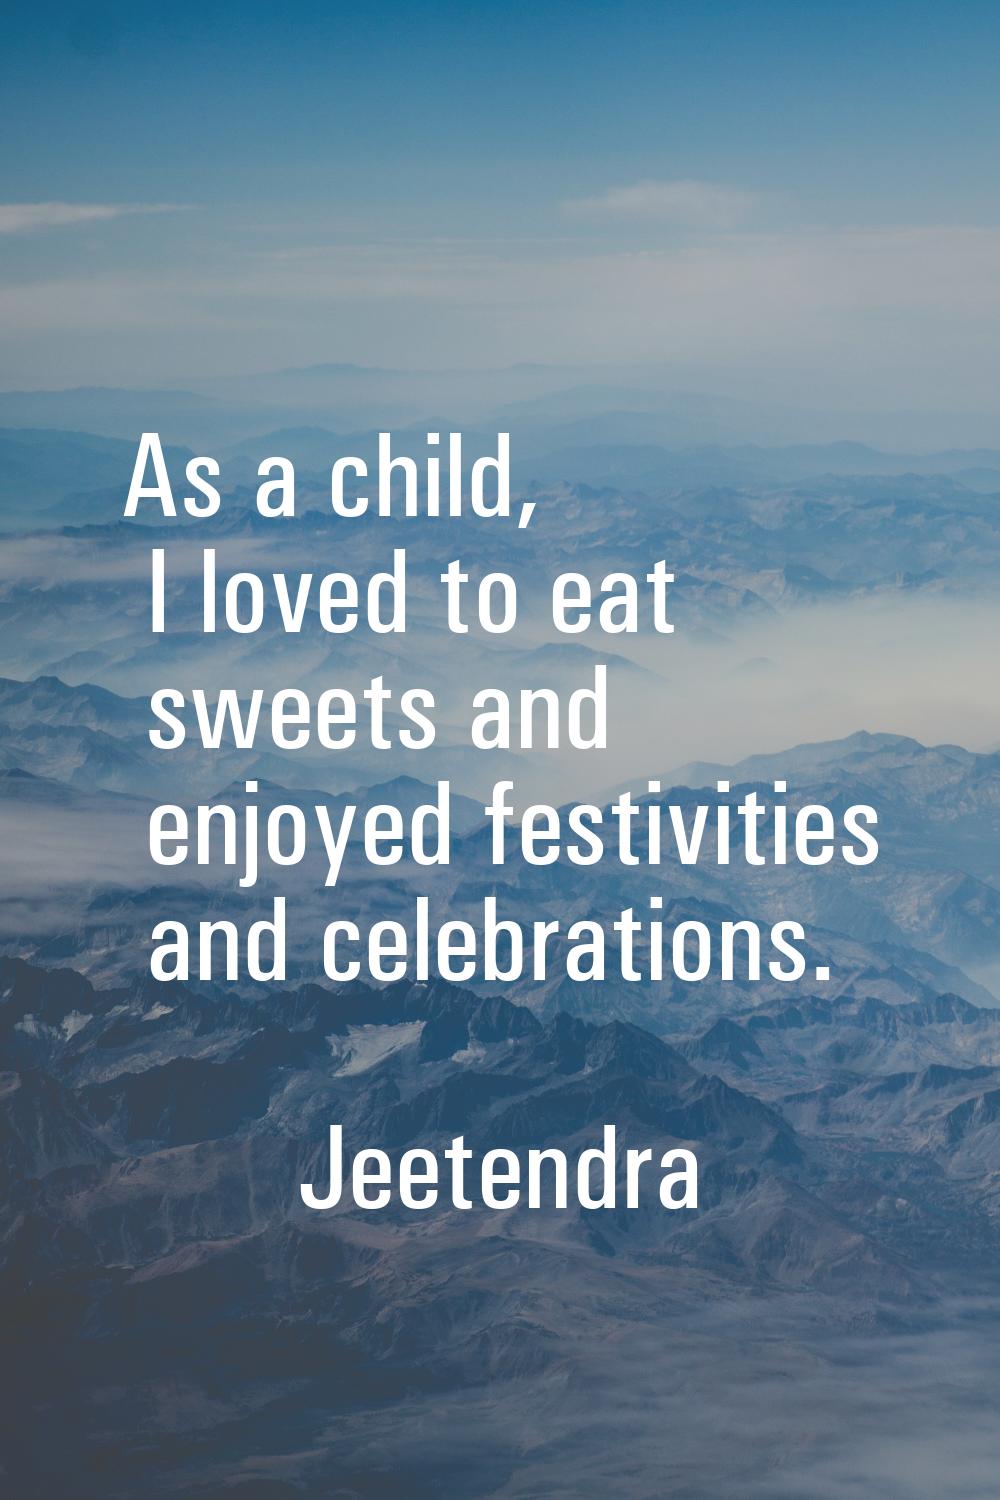 As a child, I loved to eat sweets and enjoyed festivities and celebrations.